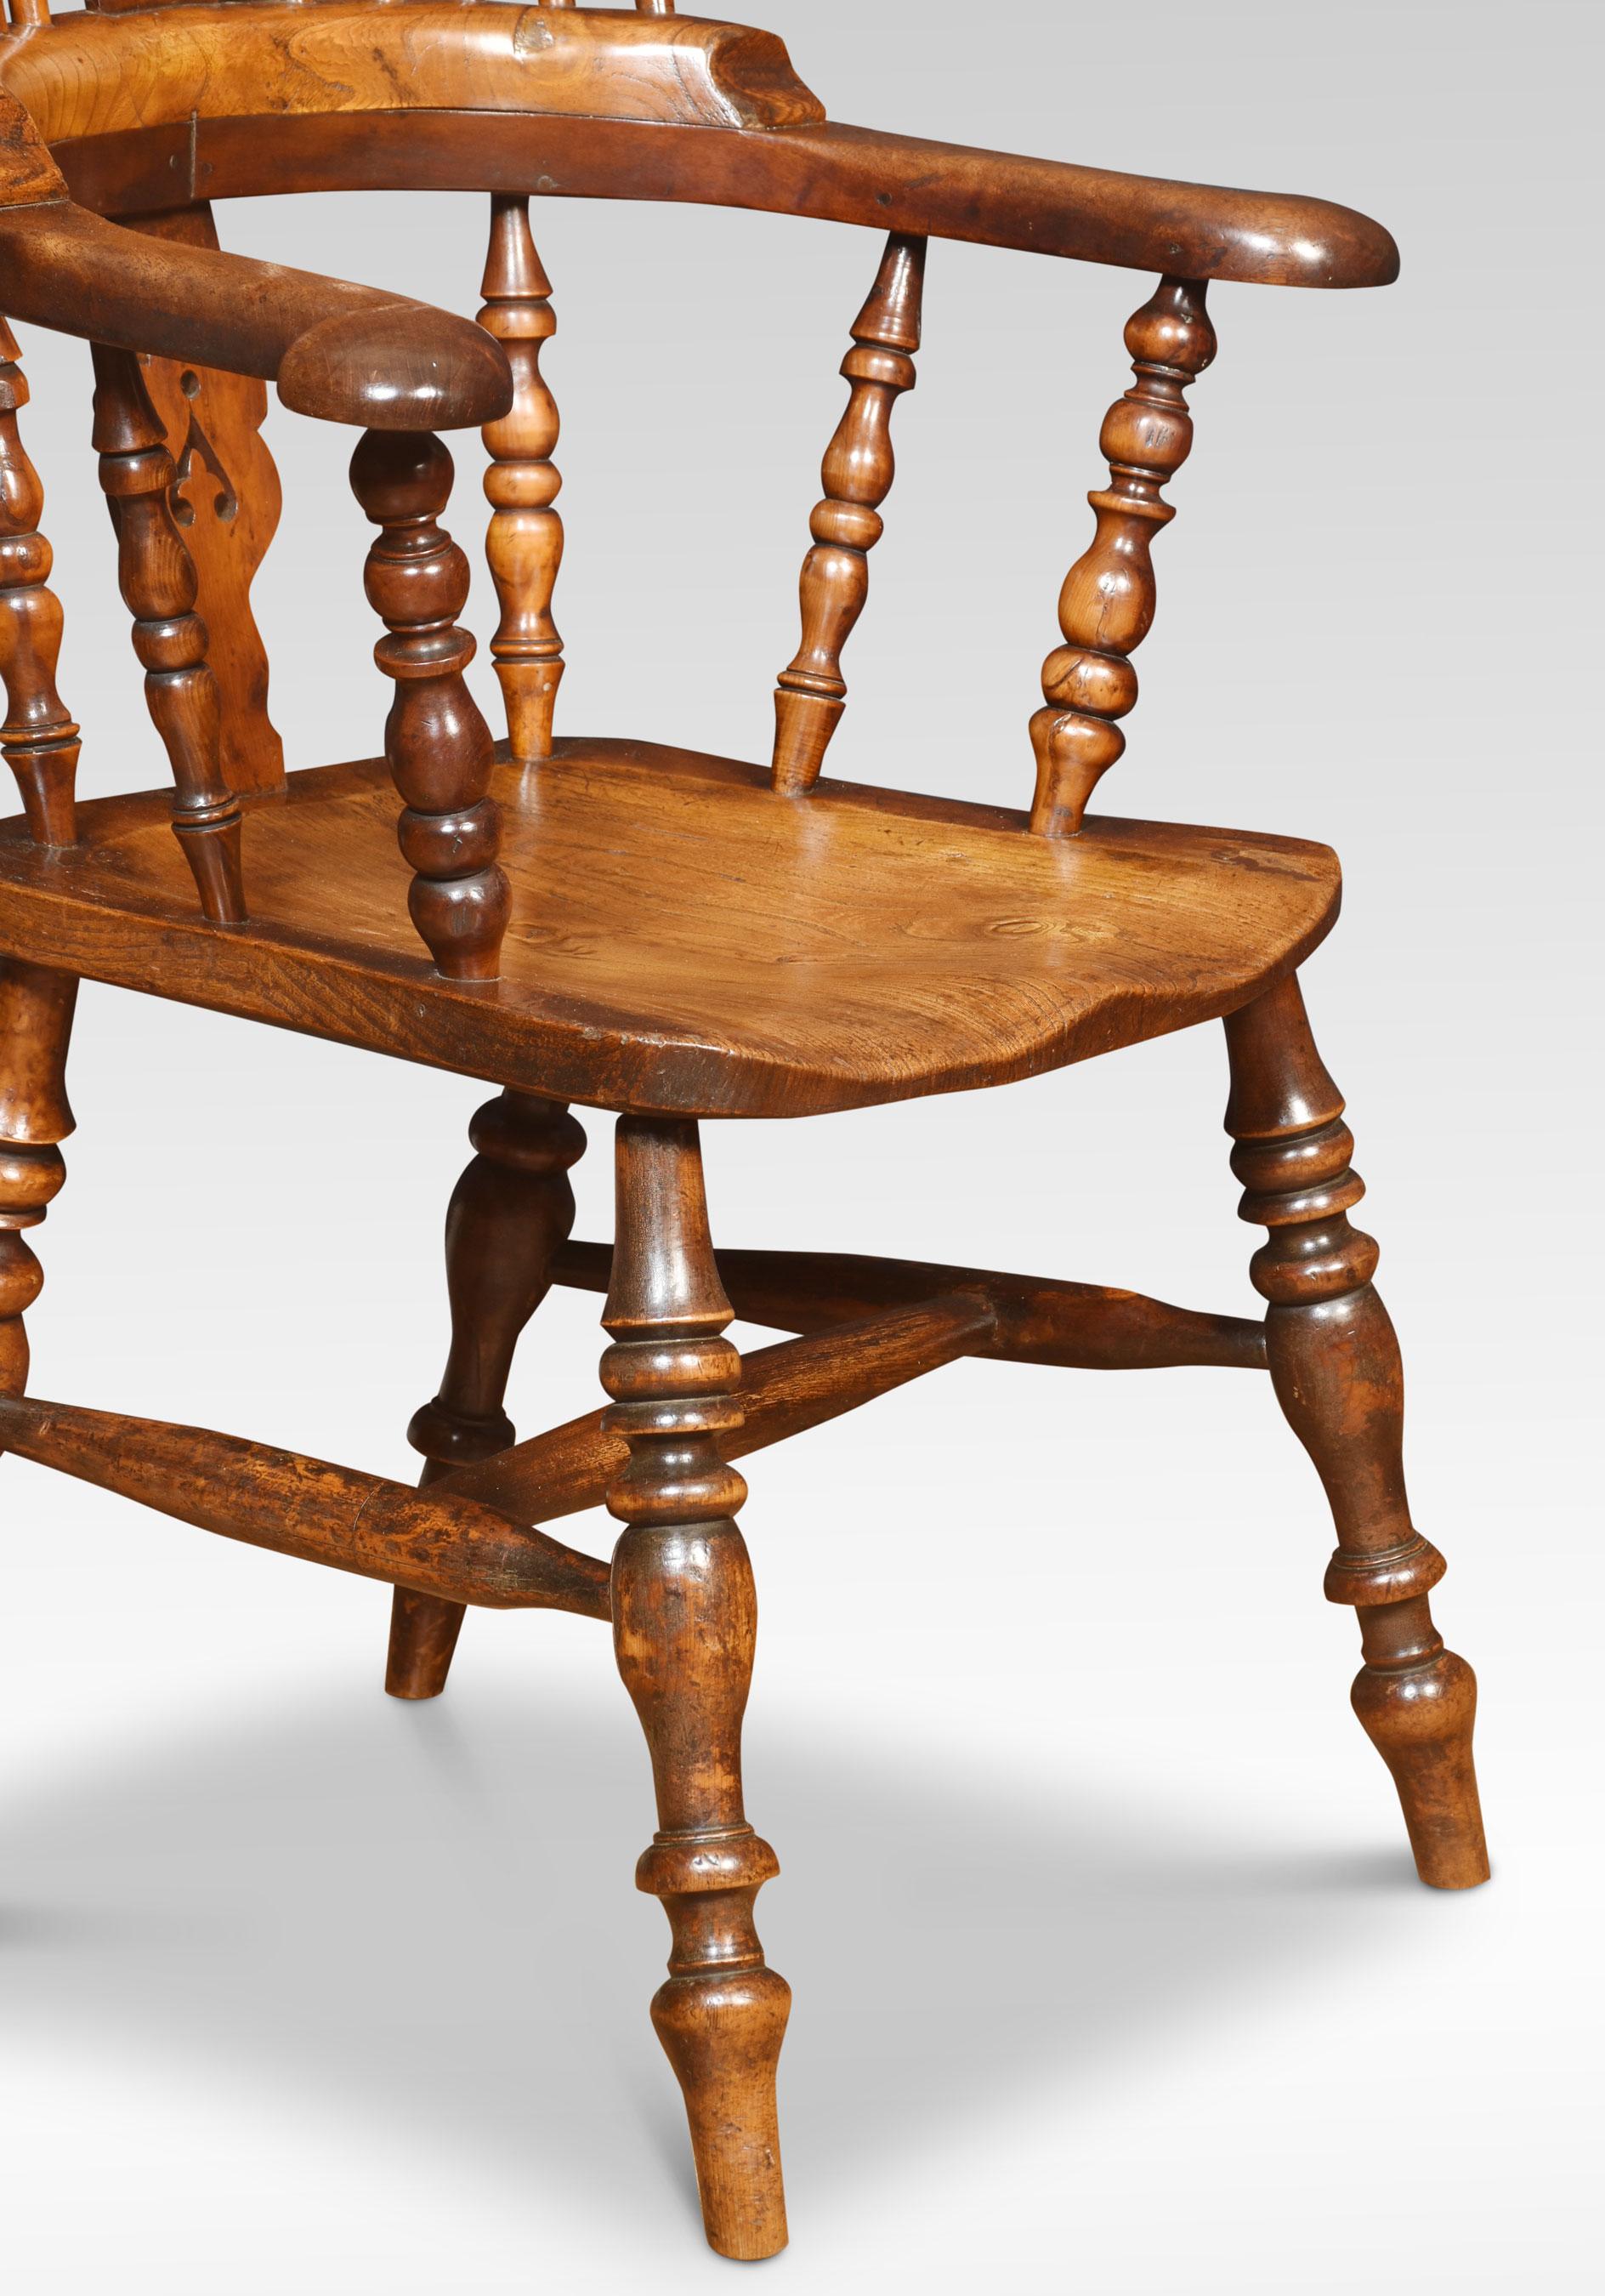 19th-century yew wood broad arm Windsor chair, the hoop back with a pierced and shaped central splat above ash seat surrounded by scrolling arms. Raised up on turned legs united by stretchers.
Dimensions
Height 46.5 Inches height to seat 17